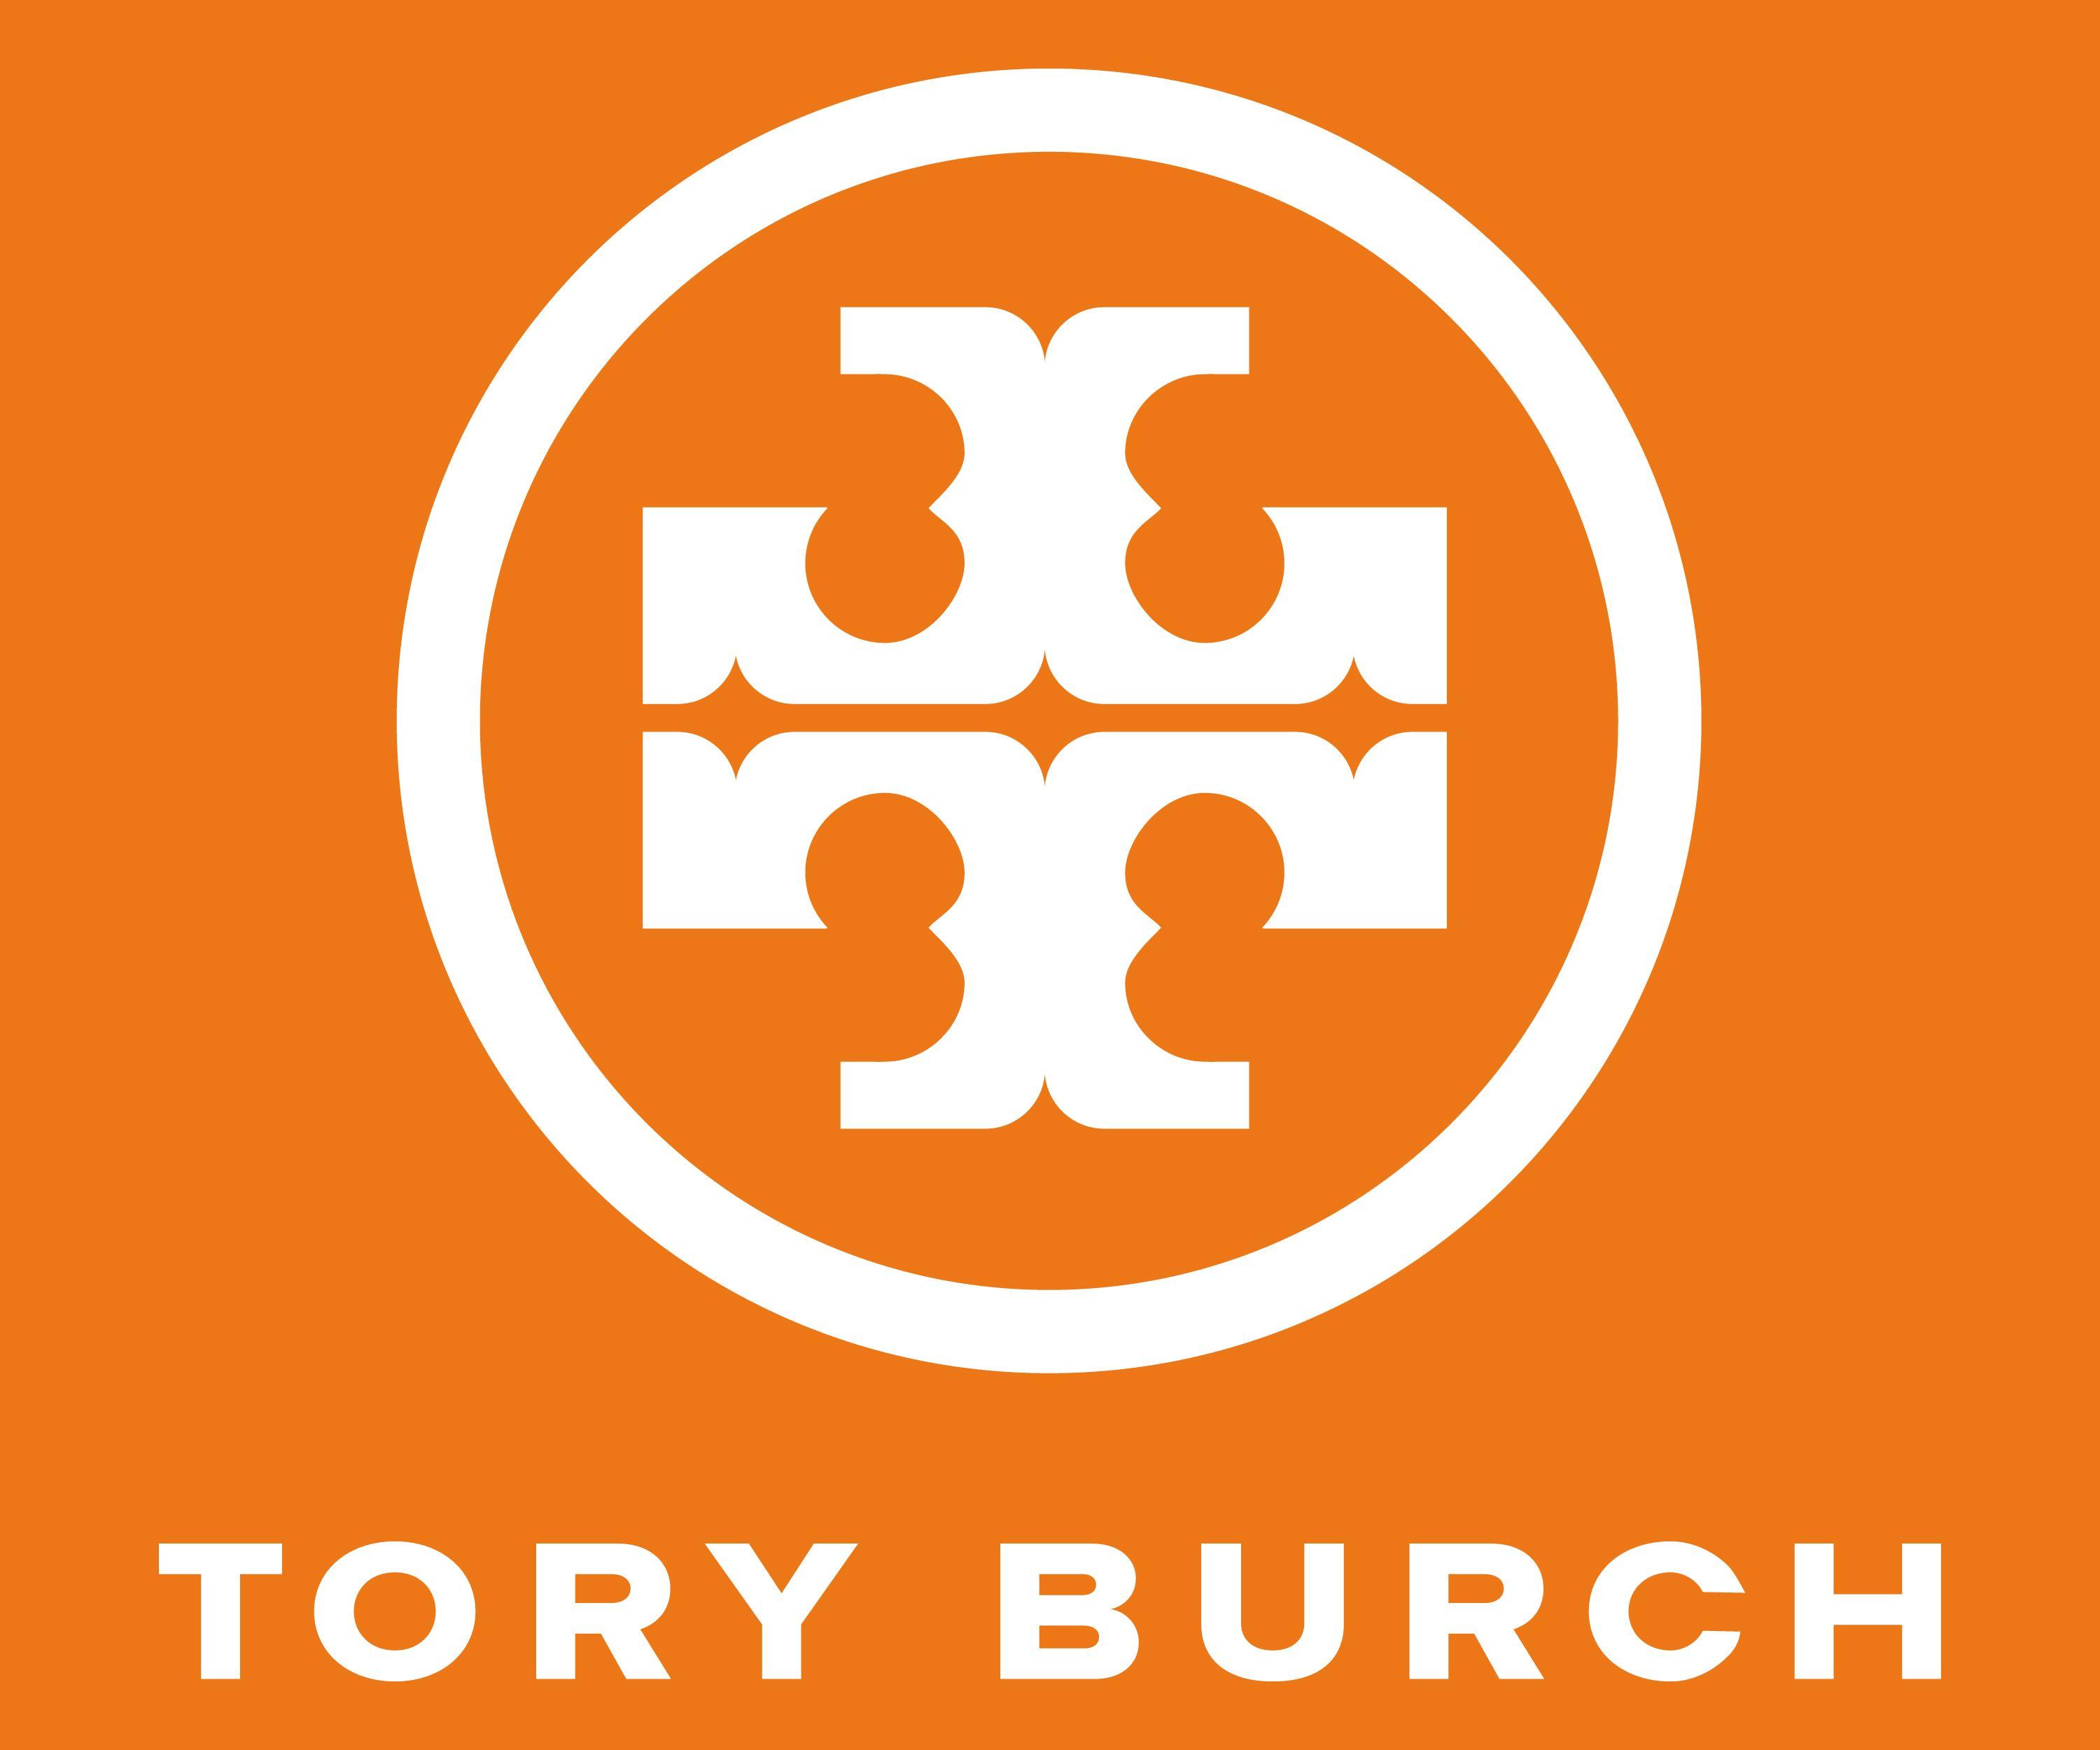 Tory Burch Logo - Tory Burch Logo, Tory Burch Symbol, Meaning, History and Evolution